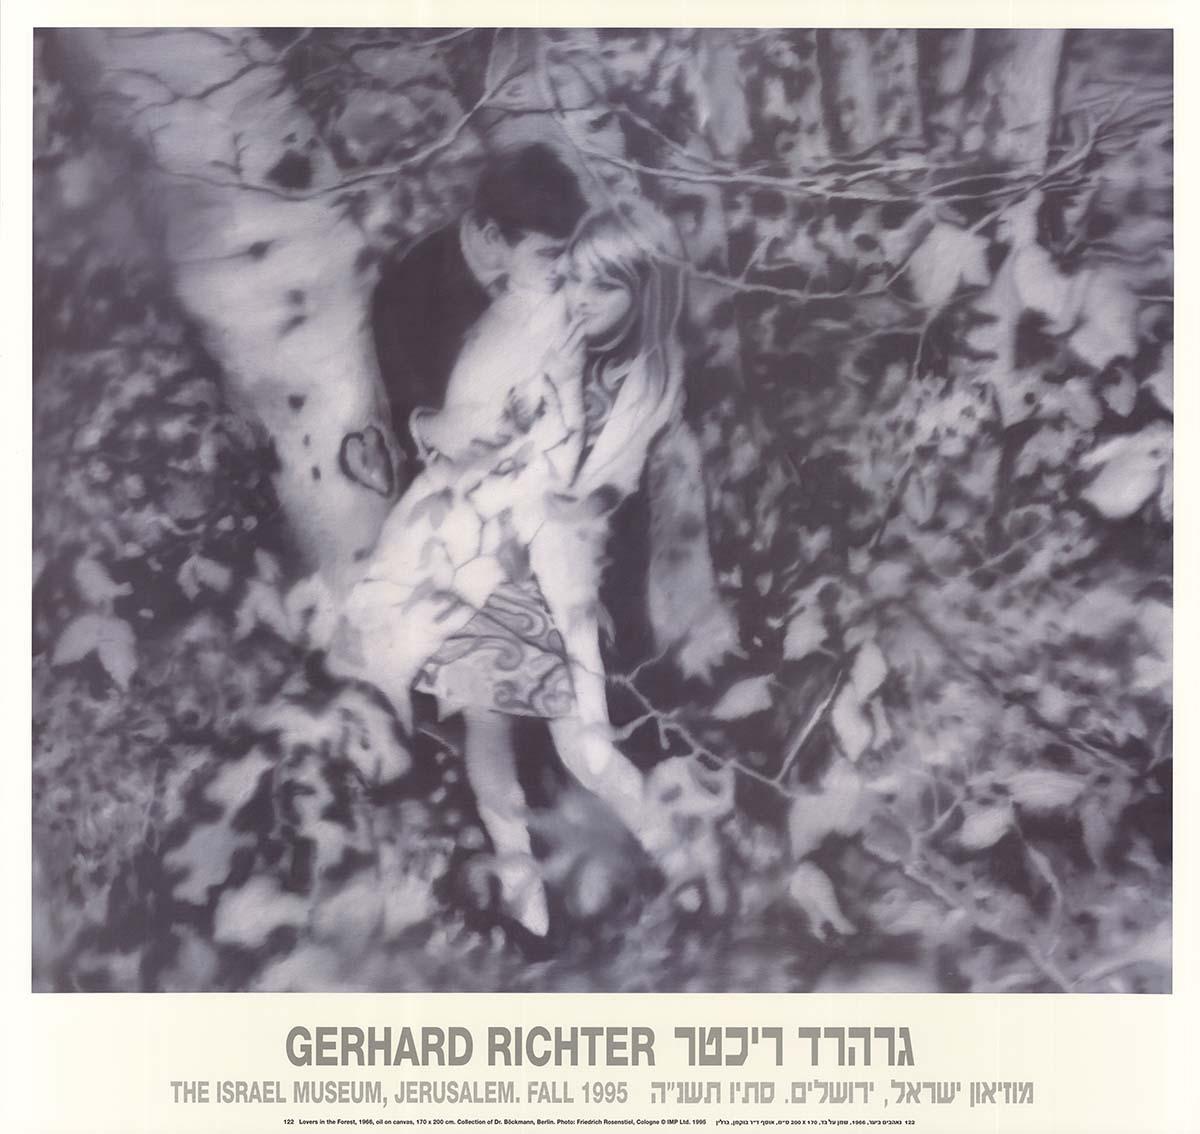 Sku: YY1193
Artist: Gerhard Richter
Title: Lovers in the Forest
Year: 1995
Signed: No
Medium: Offset Lithograph
Paper Size: 26.75 x 28.25 inches ( 67.945 x 71.755 cm )
Image Size: 22.5 x 26.75 inches ( 57.15 x 67.945 cm )
Edition Size: